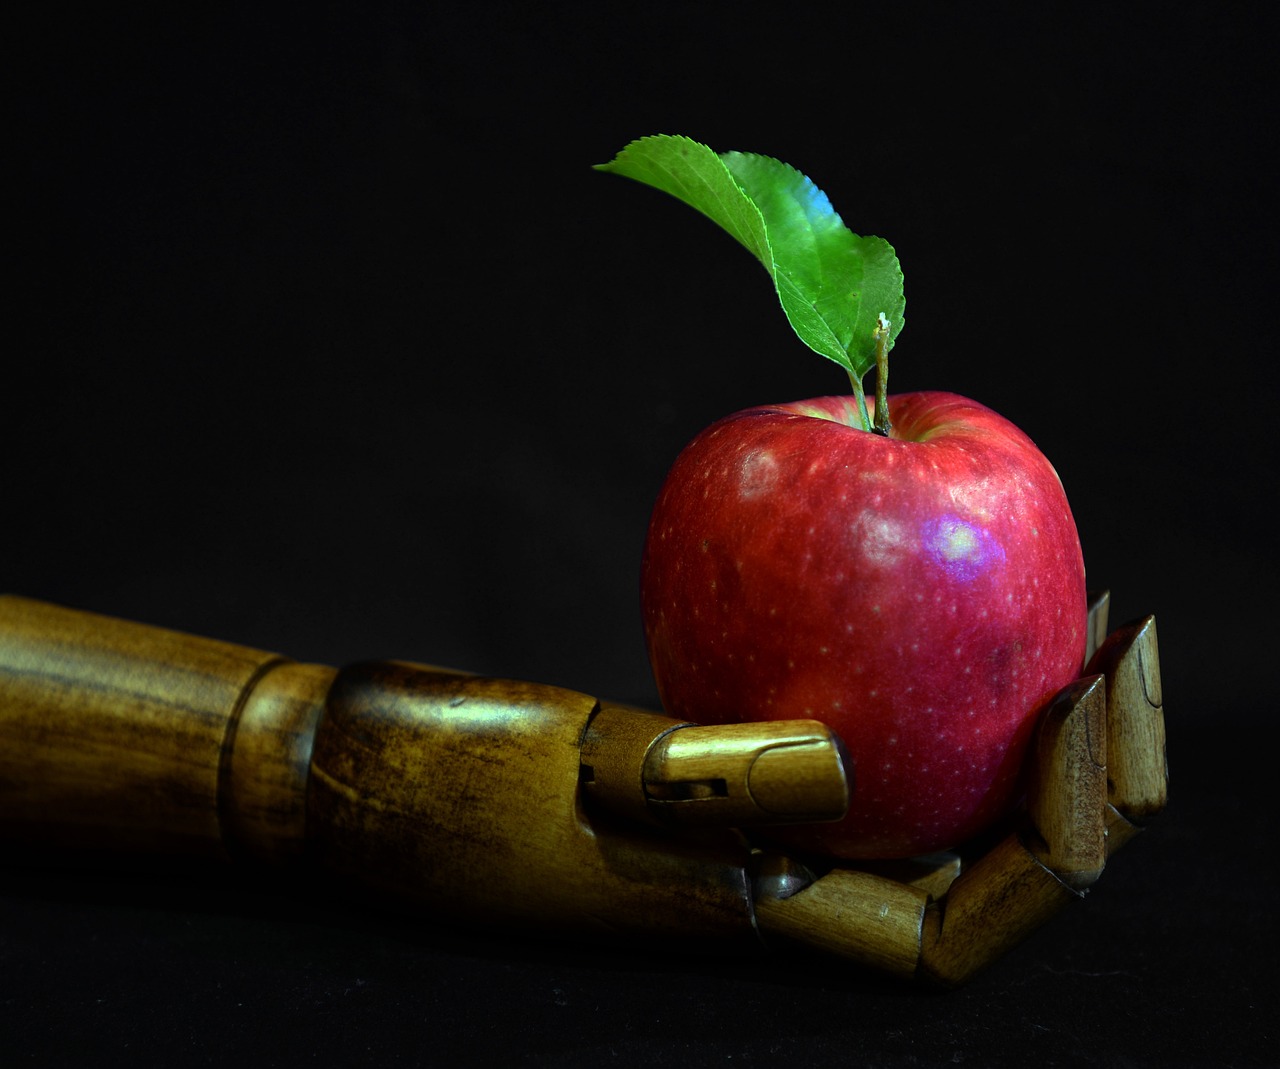 Golden robotic hand holding a red apple with green leaf